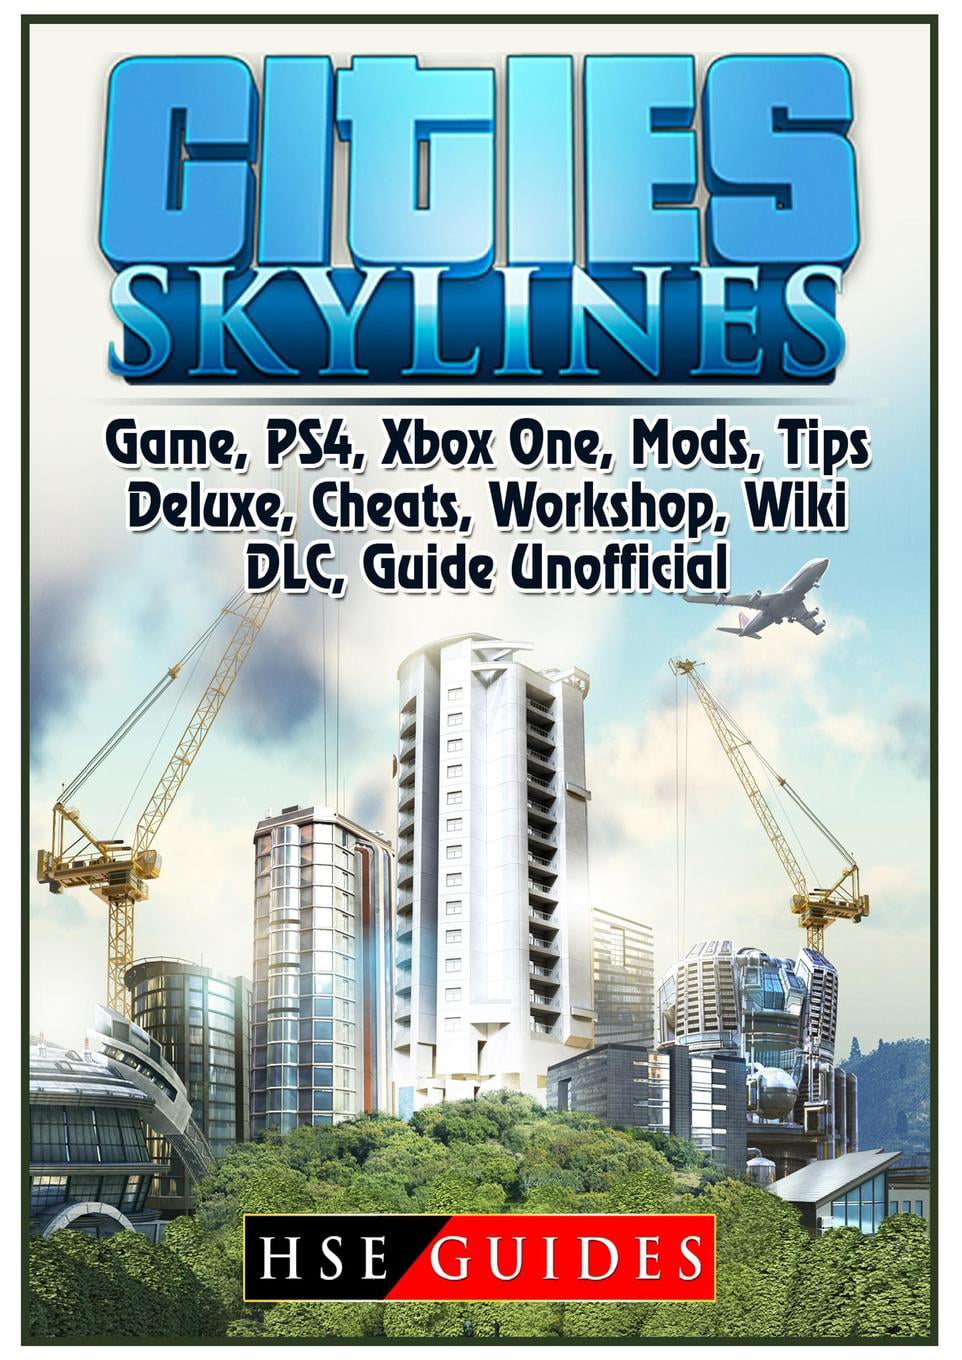 Cities Skylines Game, Ps4, Xbox One, Mods, Tips, Deluxe, Cheats, Workshop, Wiki, DLC, Guide (Paperback) - Walmart.com